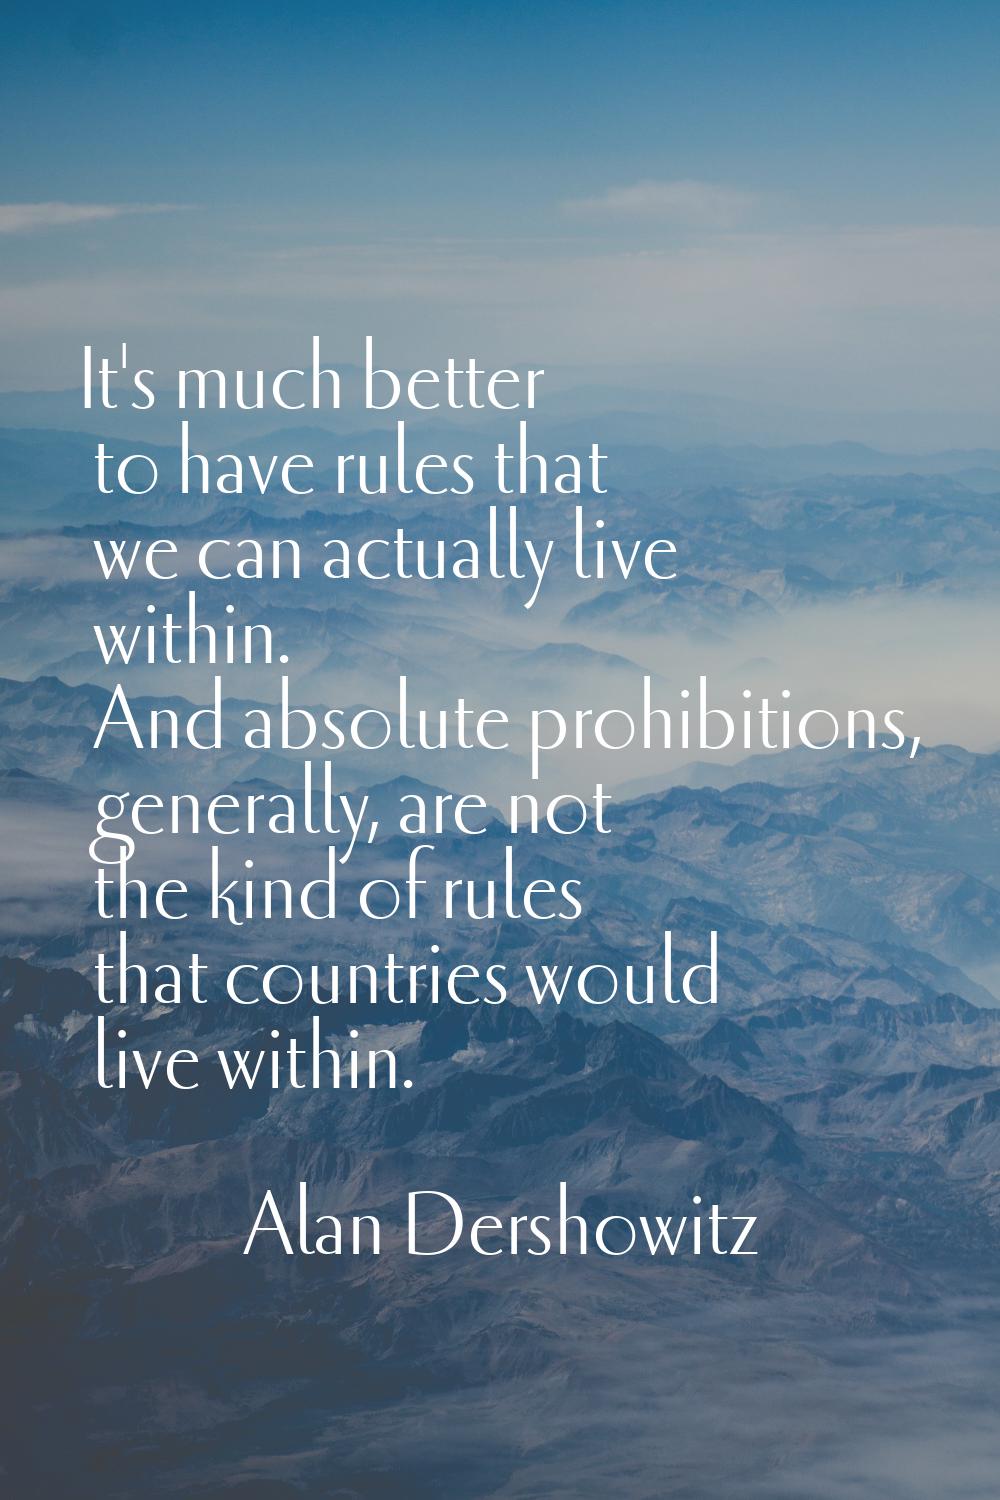 It's much better to have rules that we can actually live within. And absolute prohibitions, general